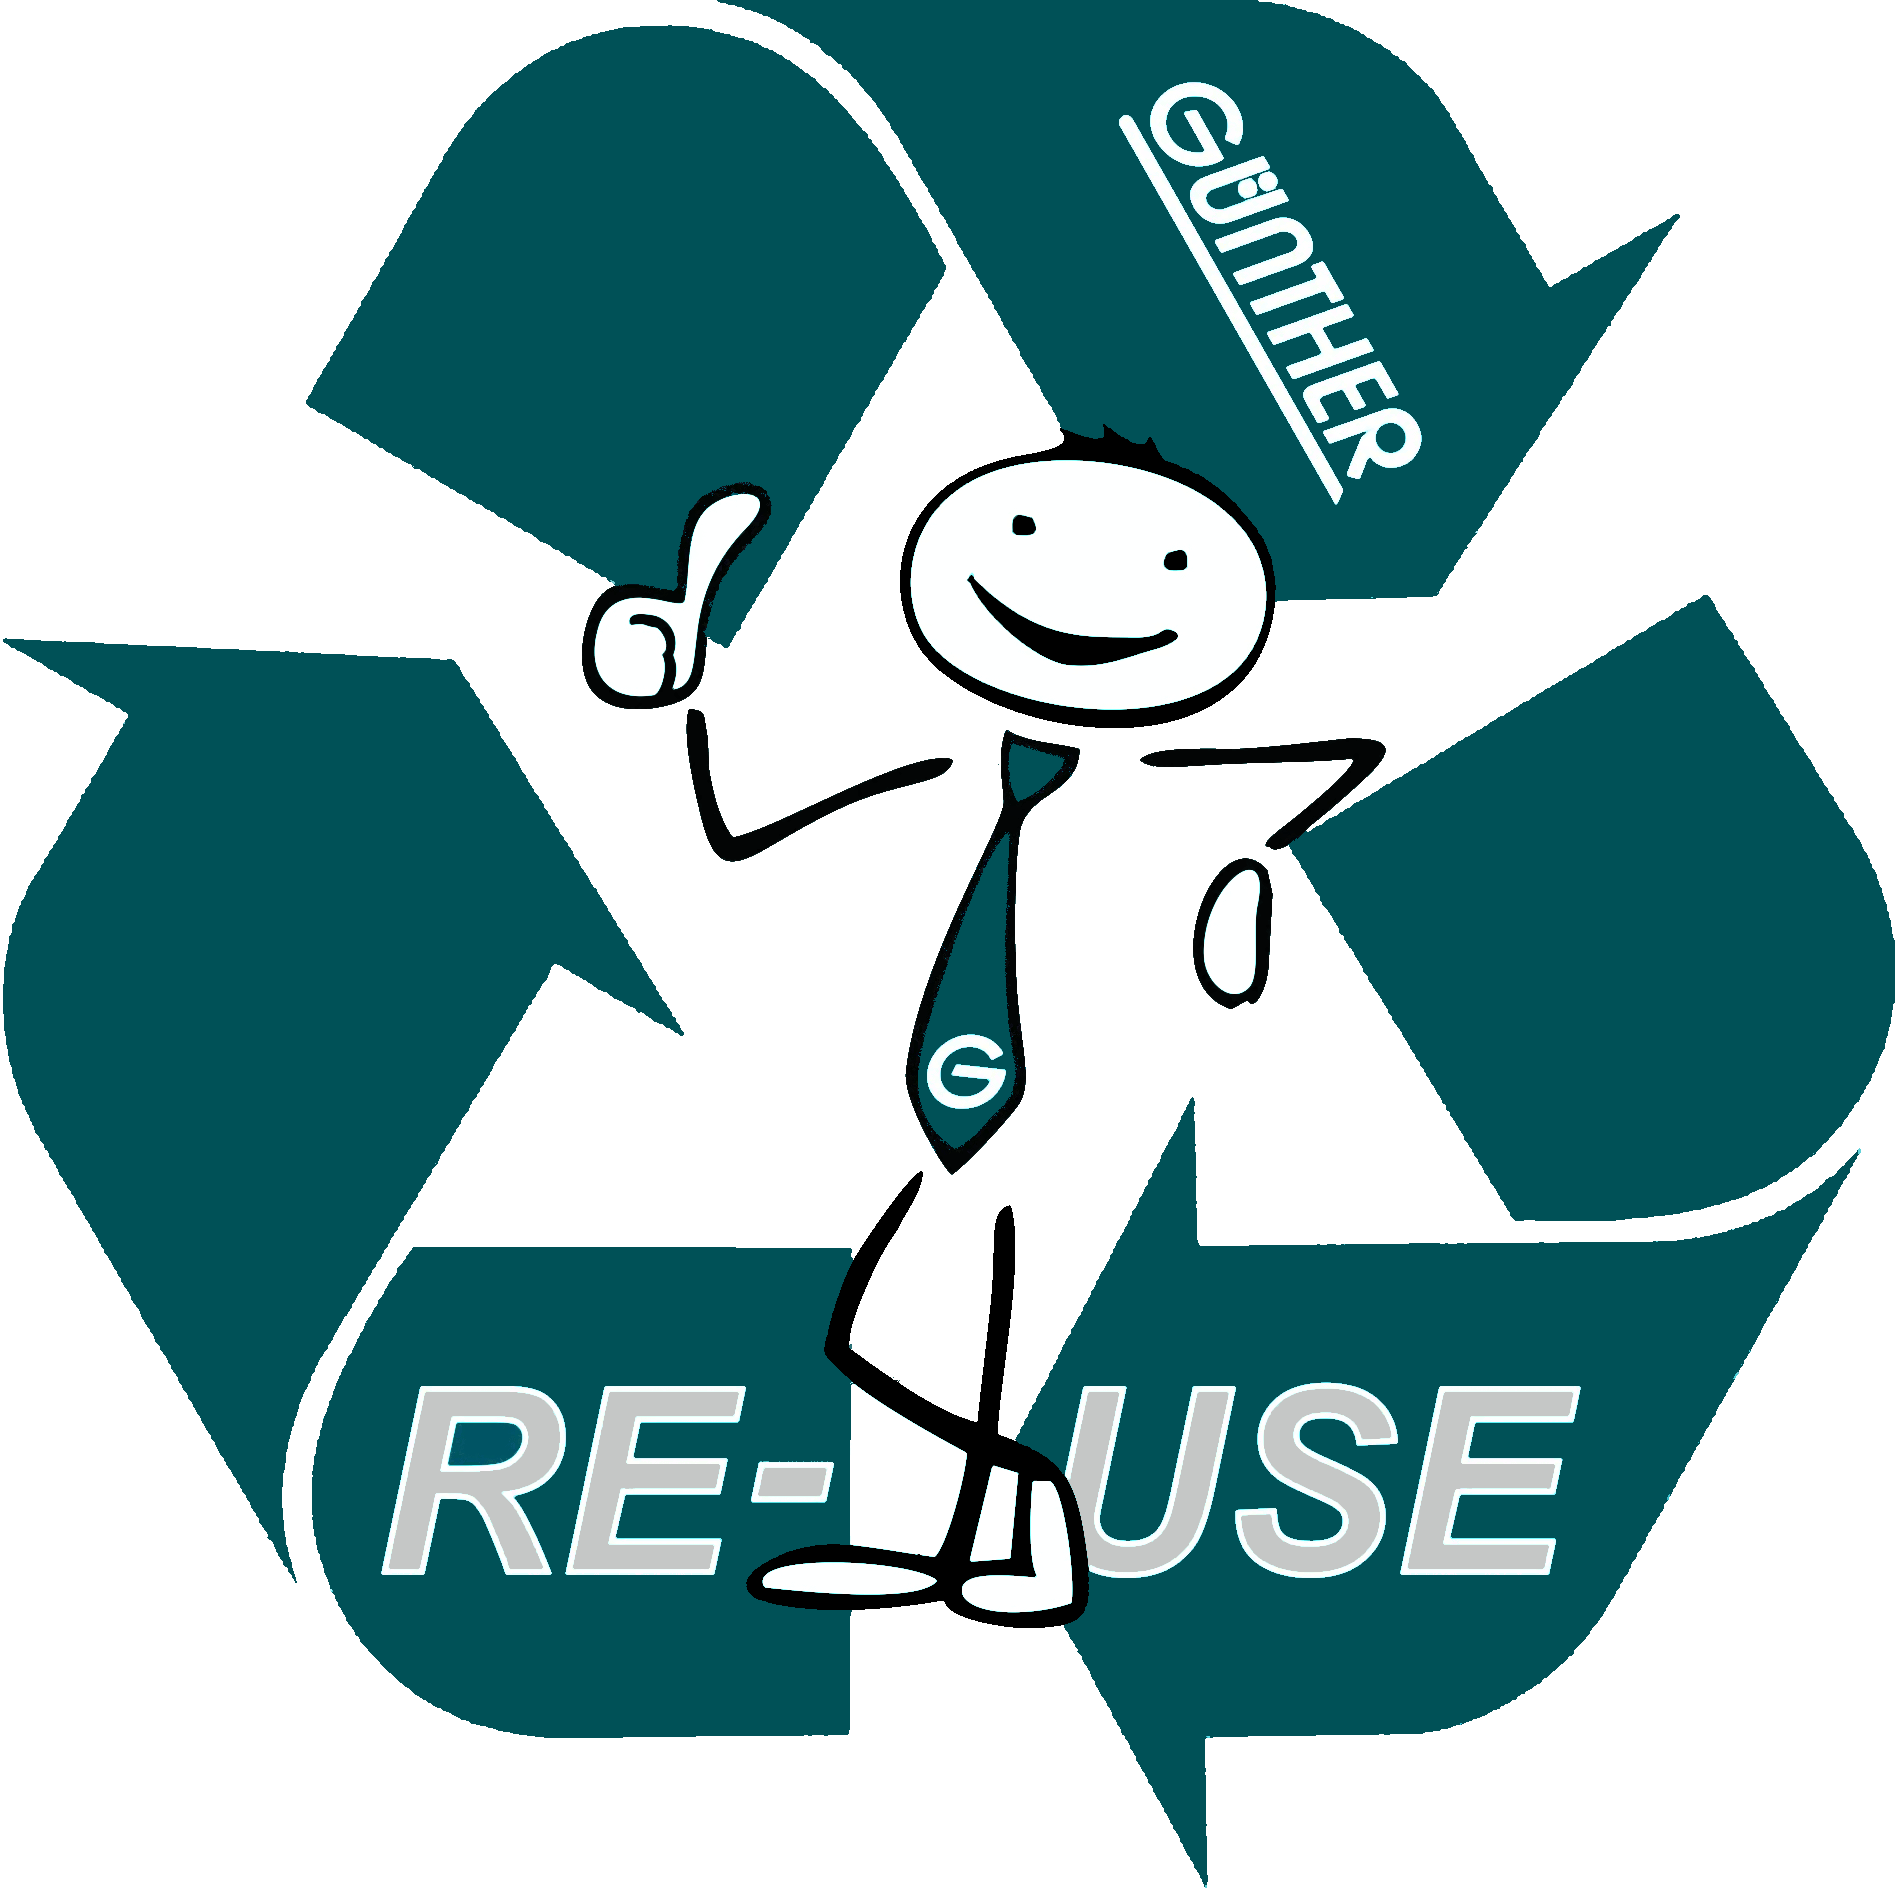 RE-USE